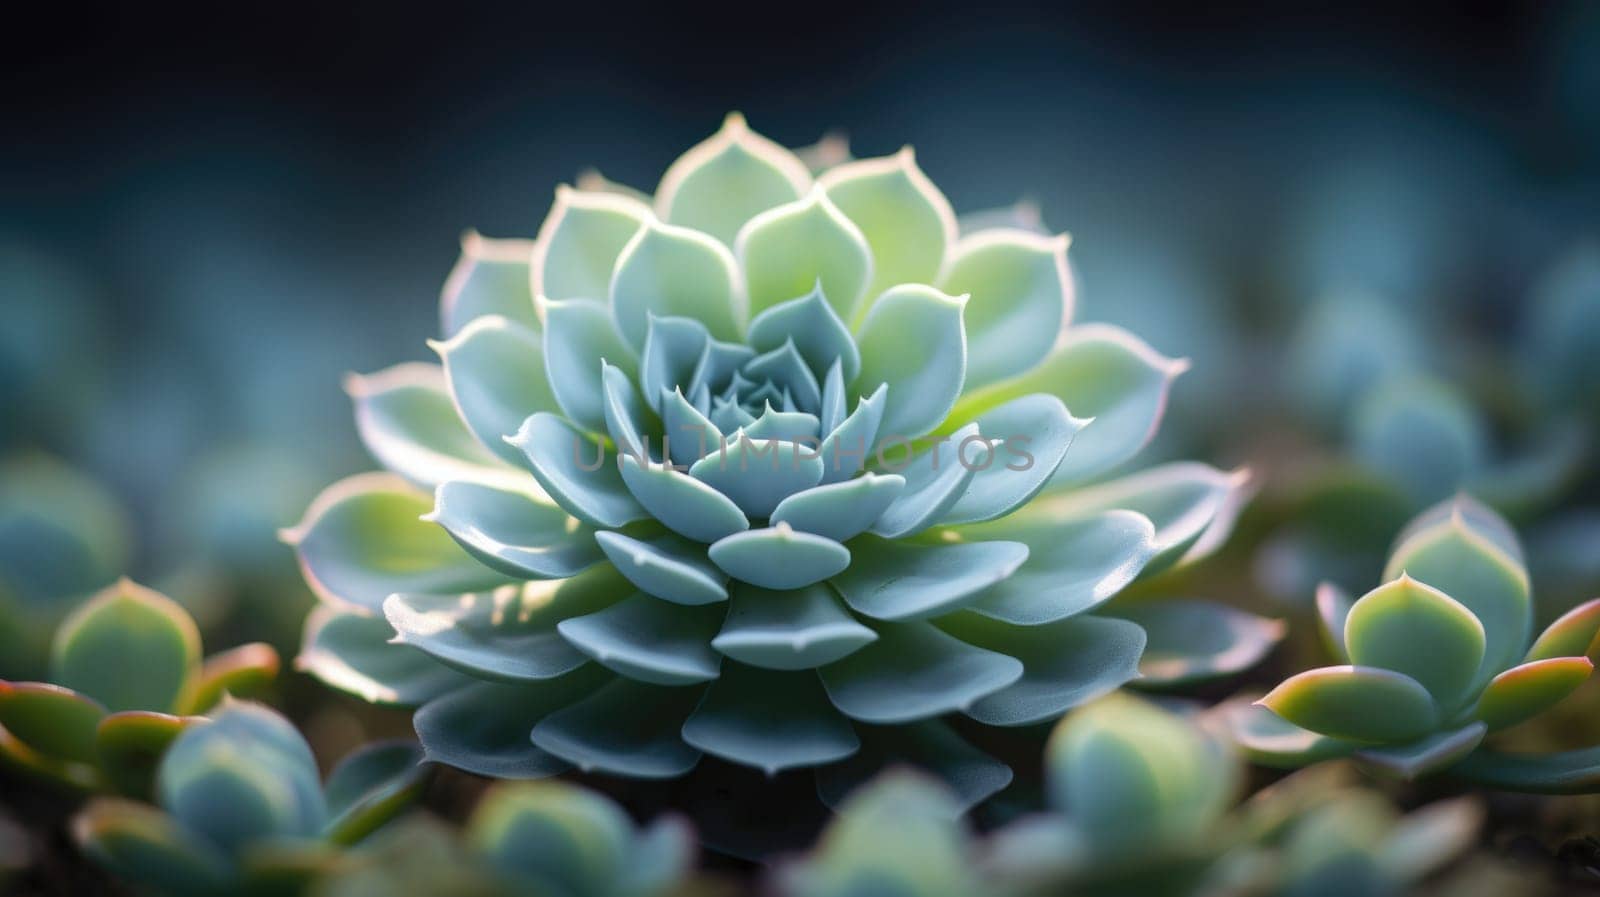 A close up of a succulent plant with green leaves, AI by starush